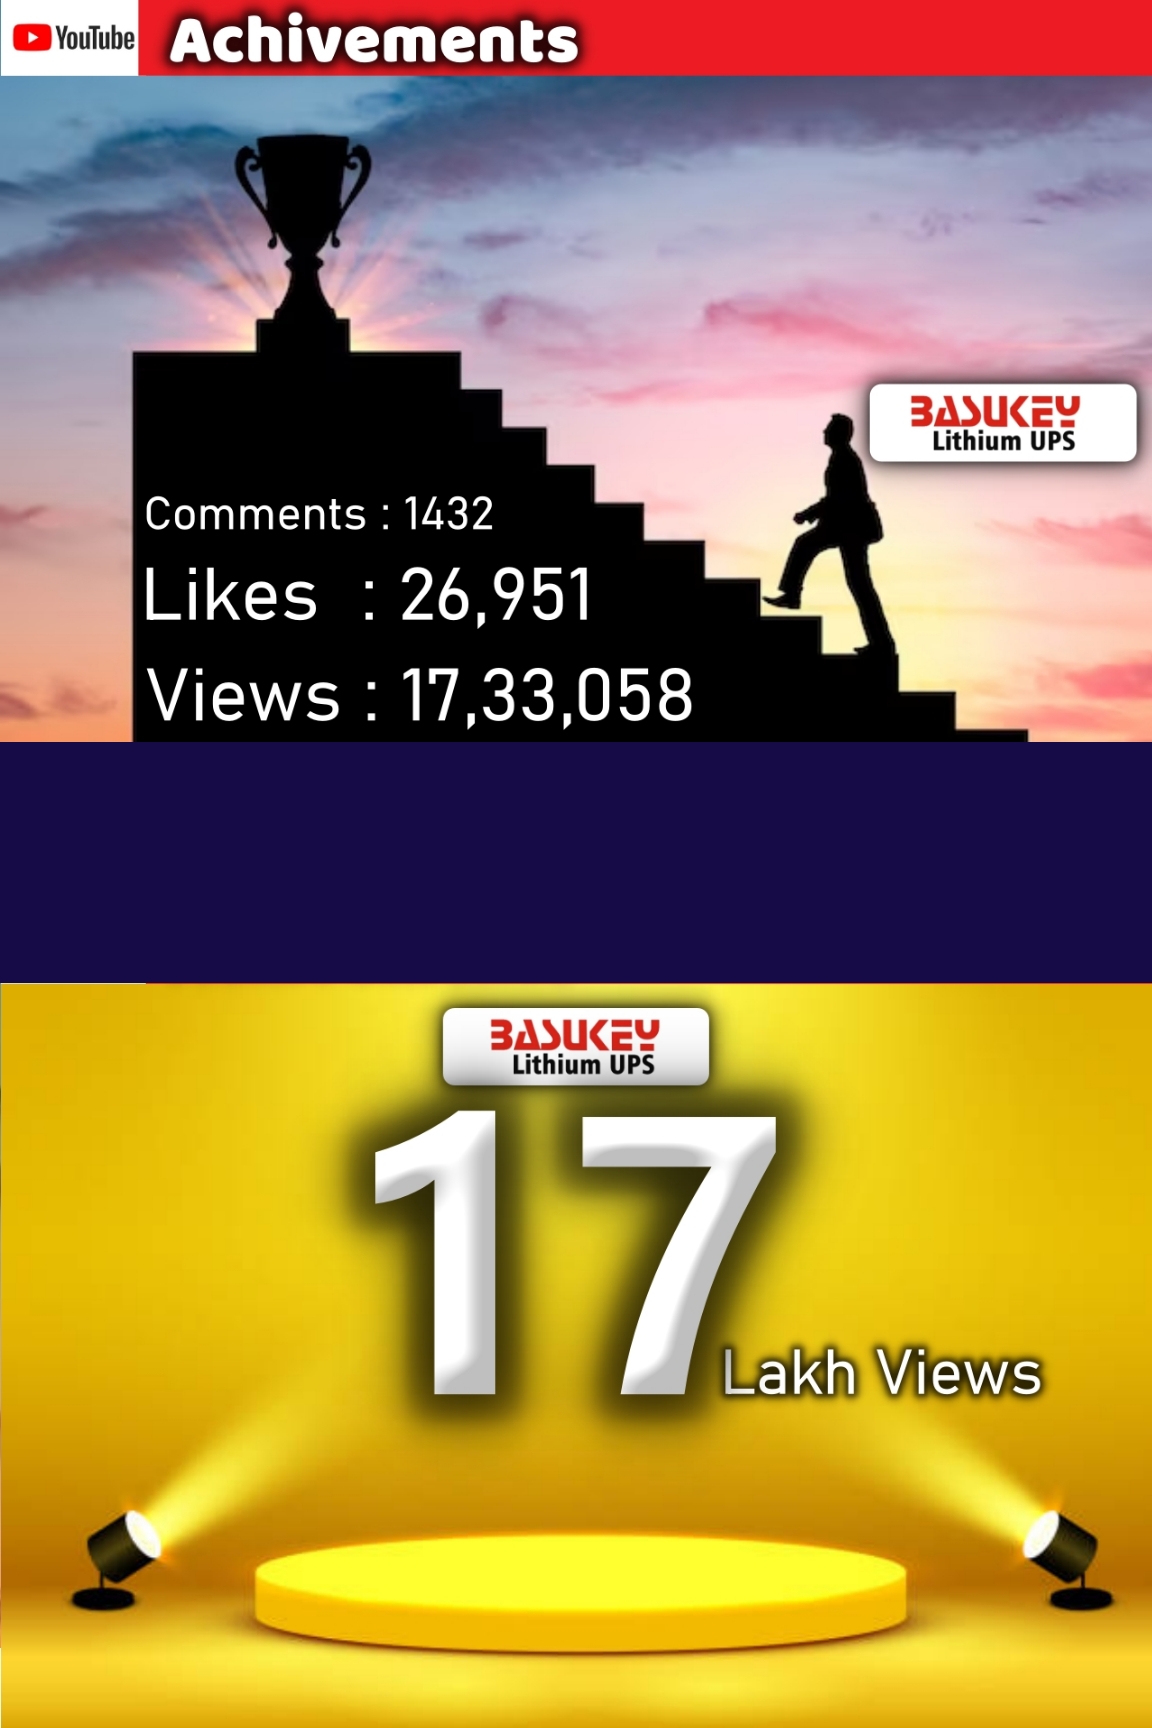 basukey achivements in youtube 1